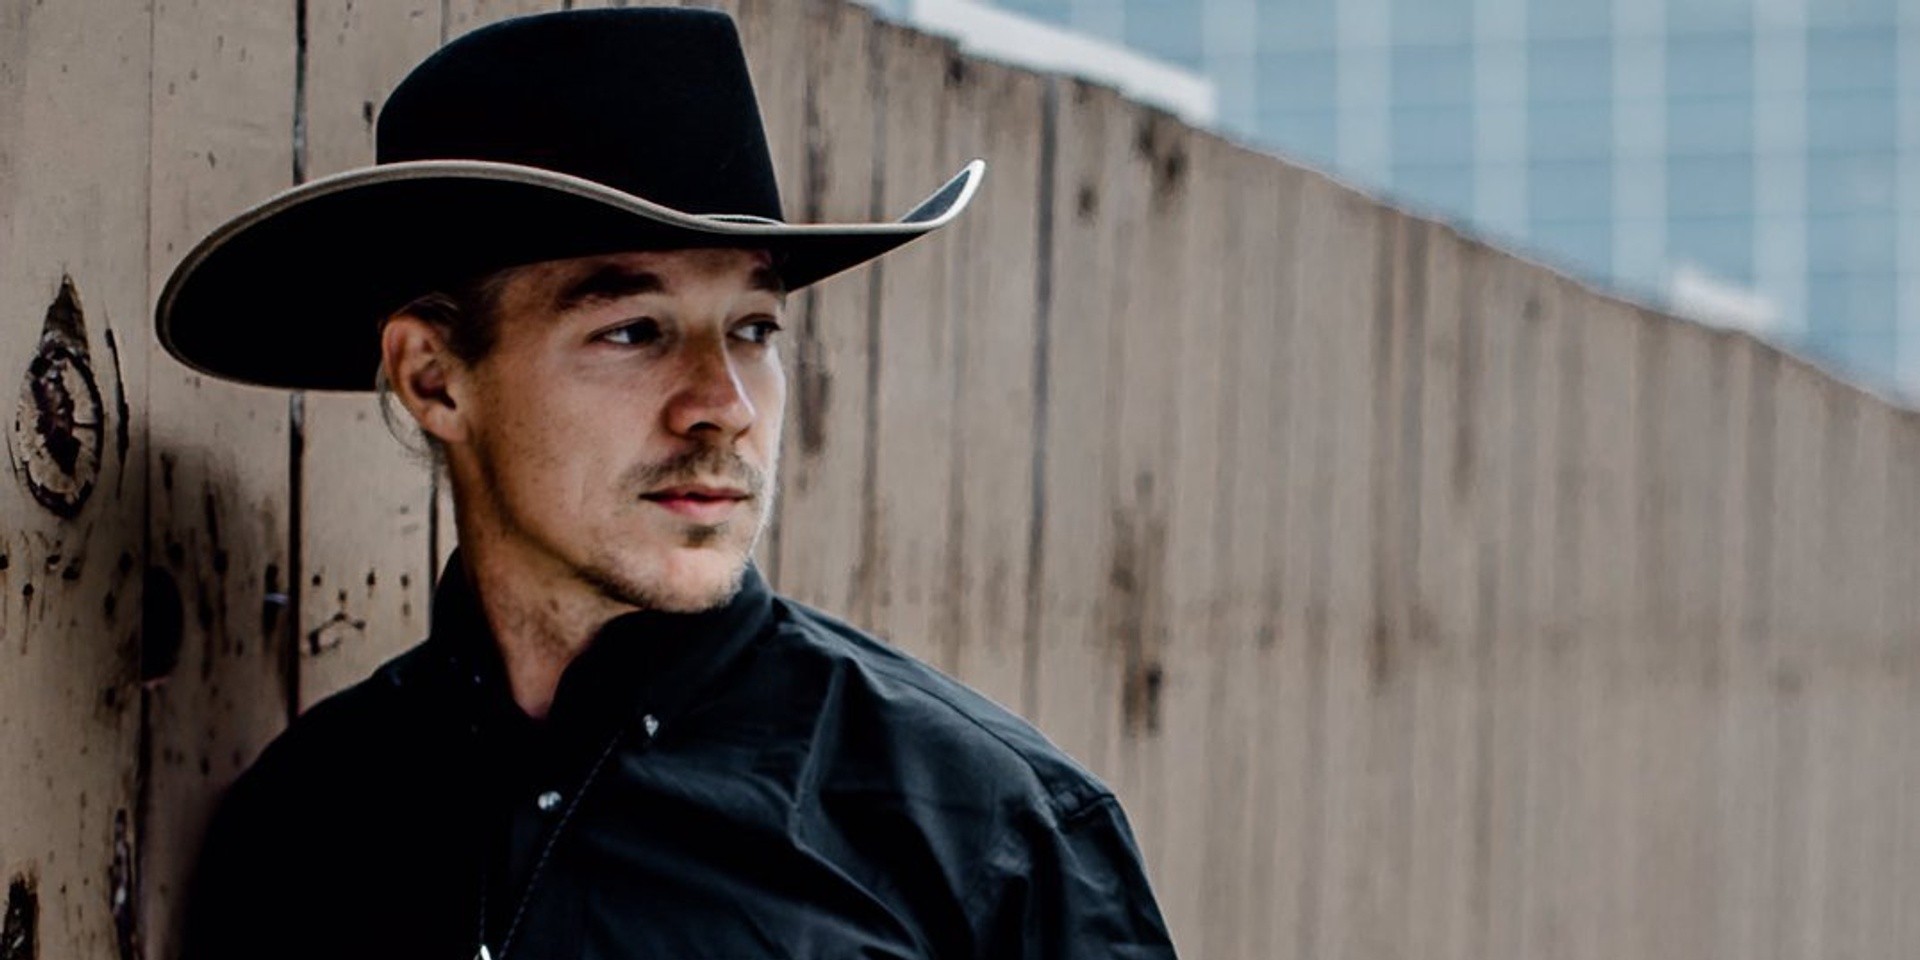 Diplo debuts new Country persona, releases new single, 'So Long' – listen